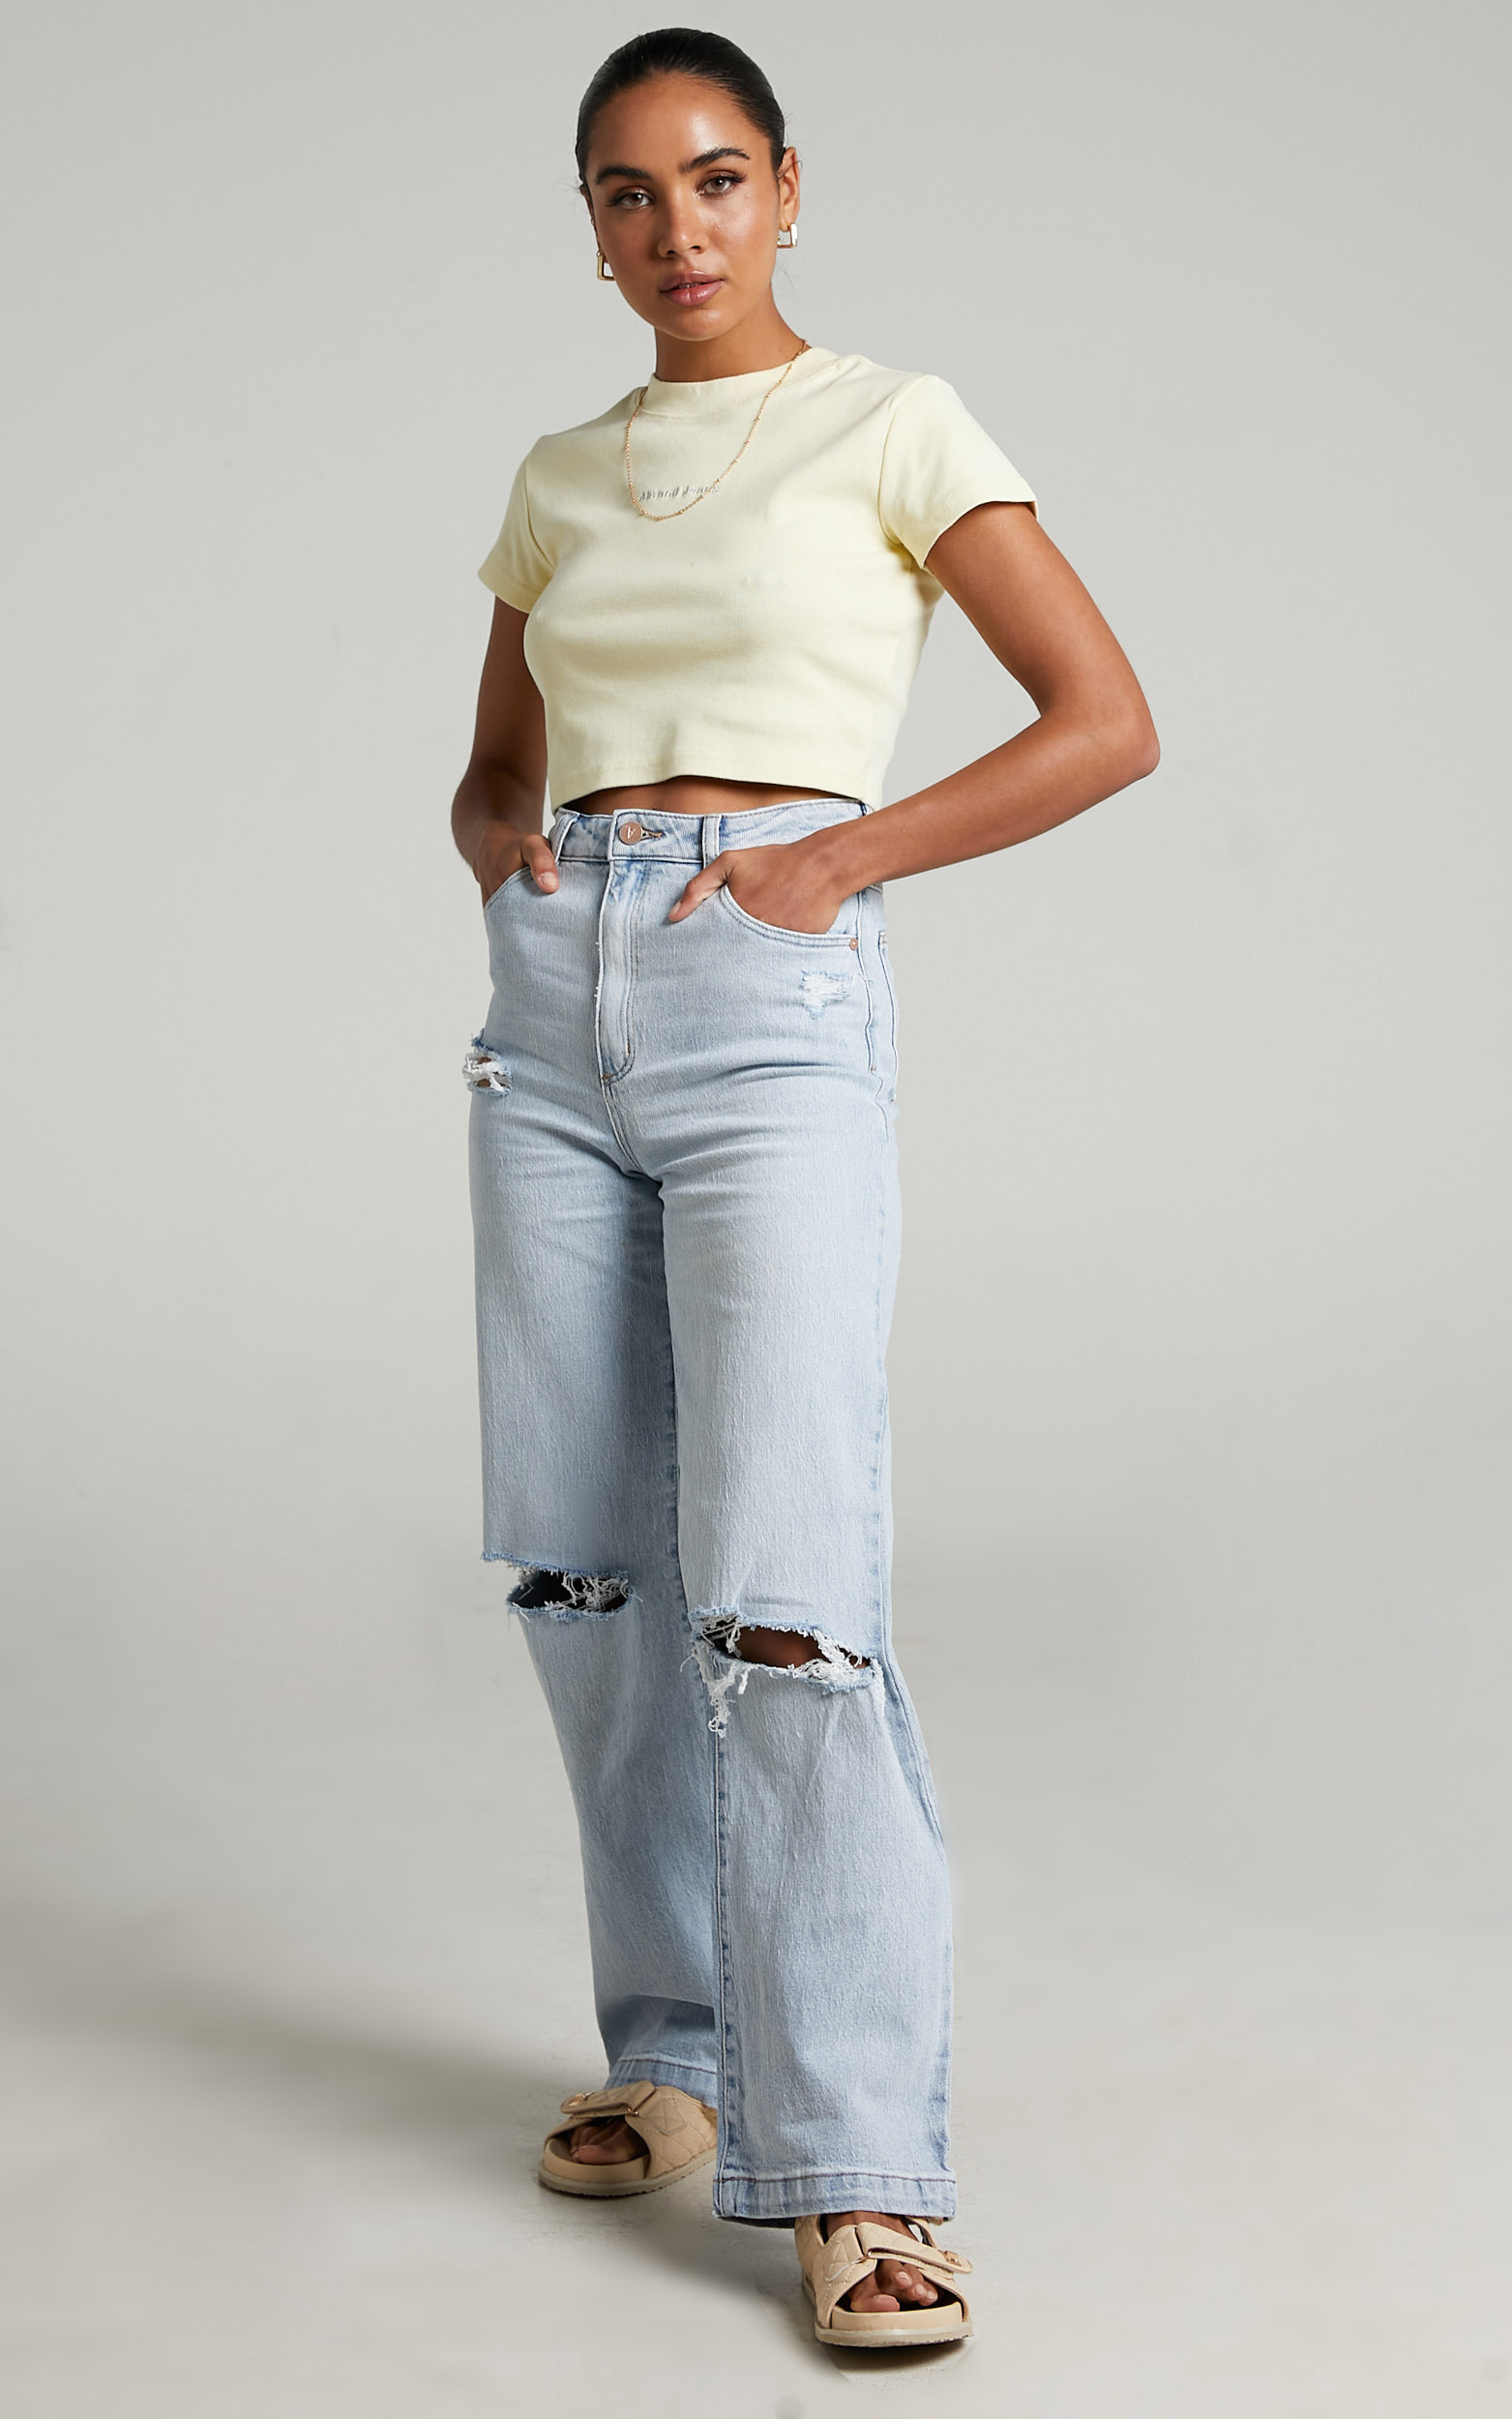 Abrand - 90's Crop Tee in Butter - L, YEL1, hi-res image number null